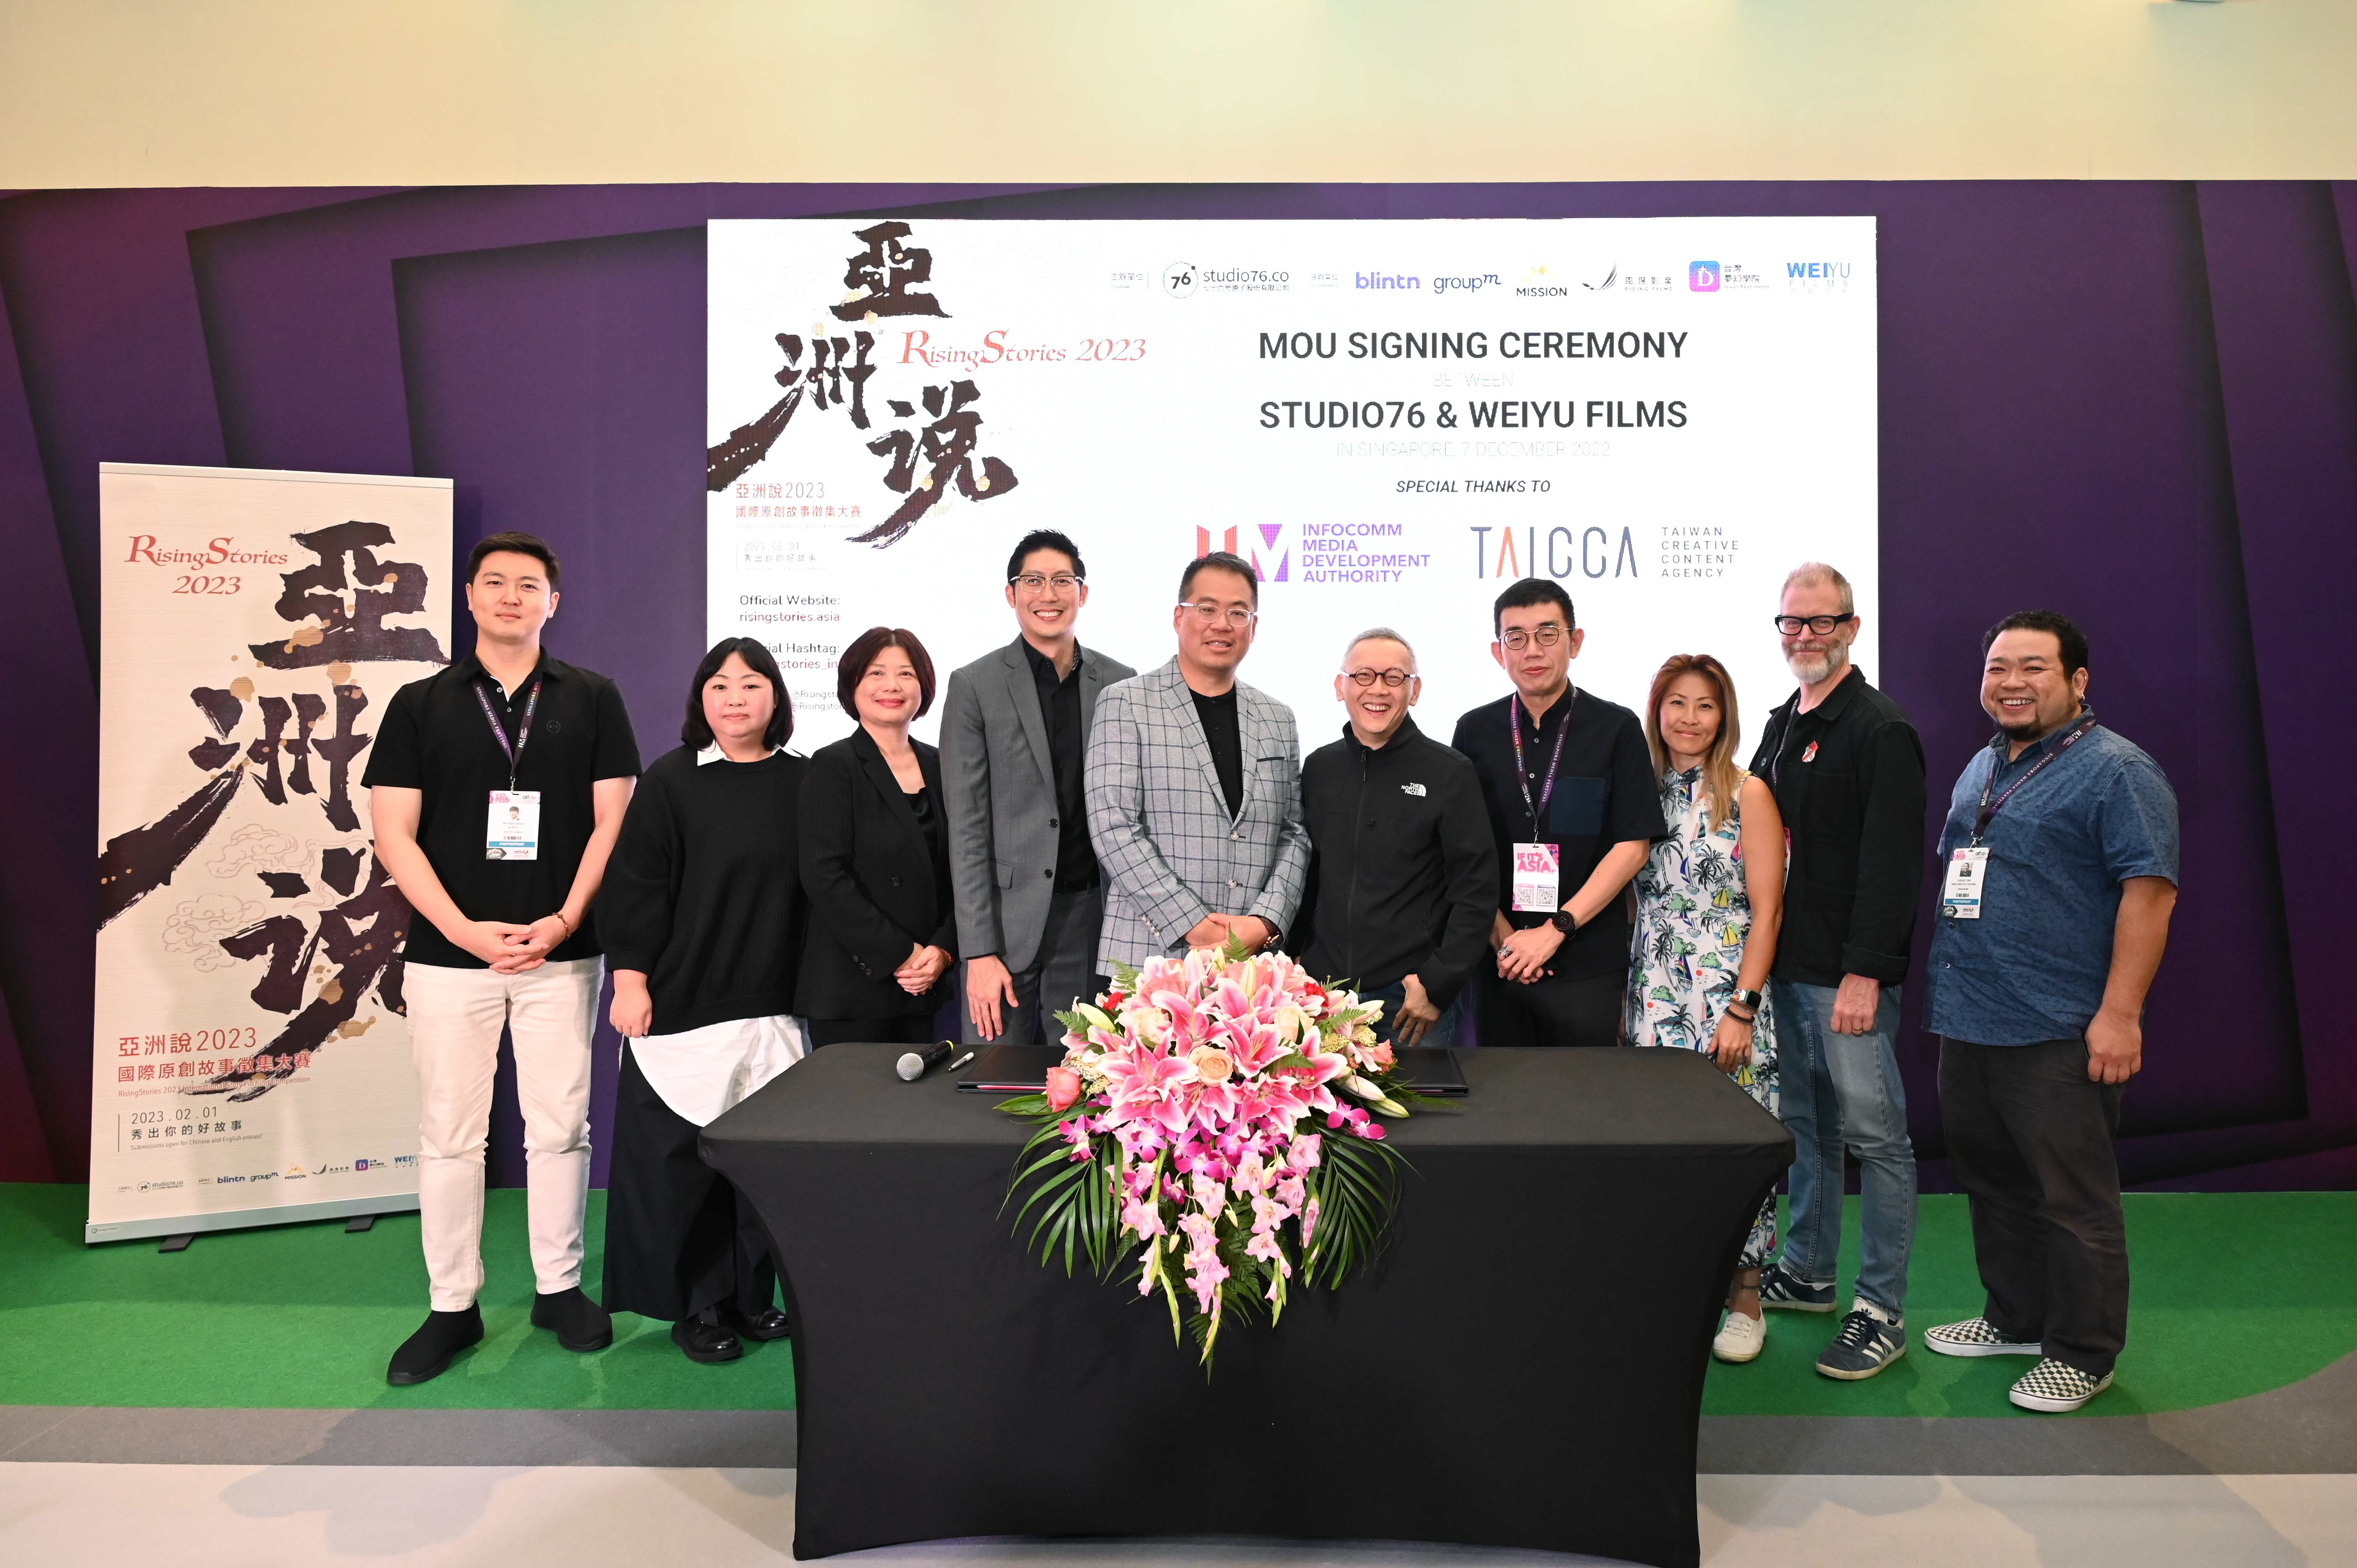 TAIWAN’S STUDIO76 AND SINGAPORE’S WEIYU FILMS COLLABORATE TO LAUNCH RISINGSTORIES 2023